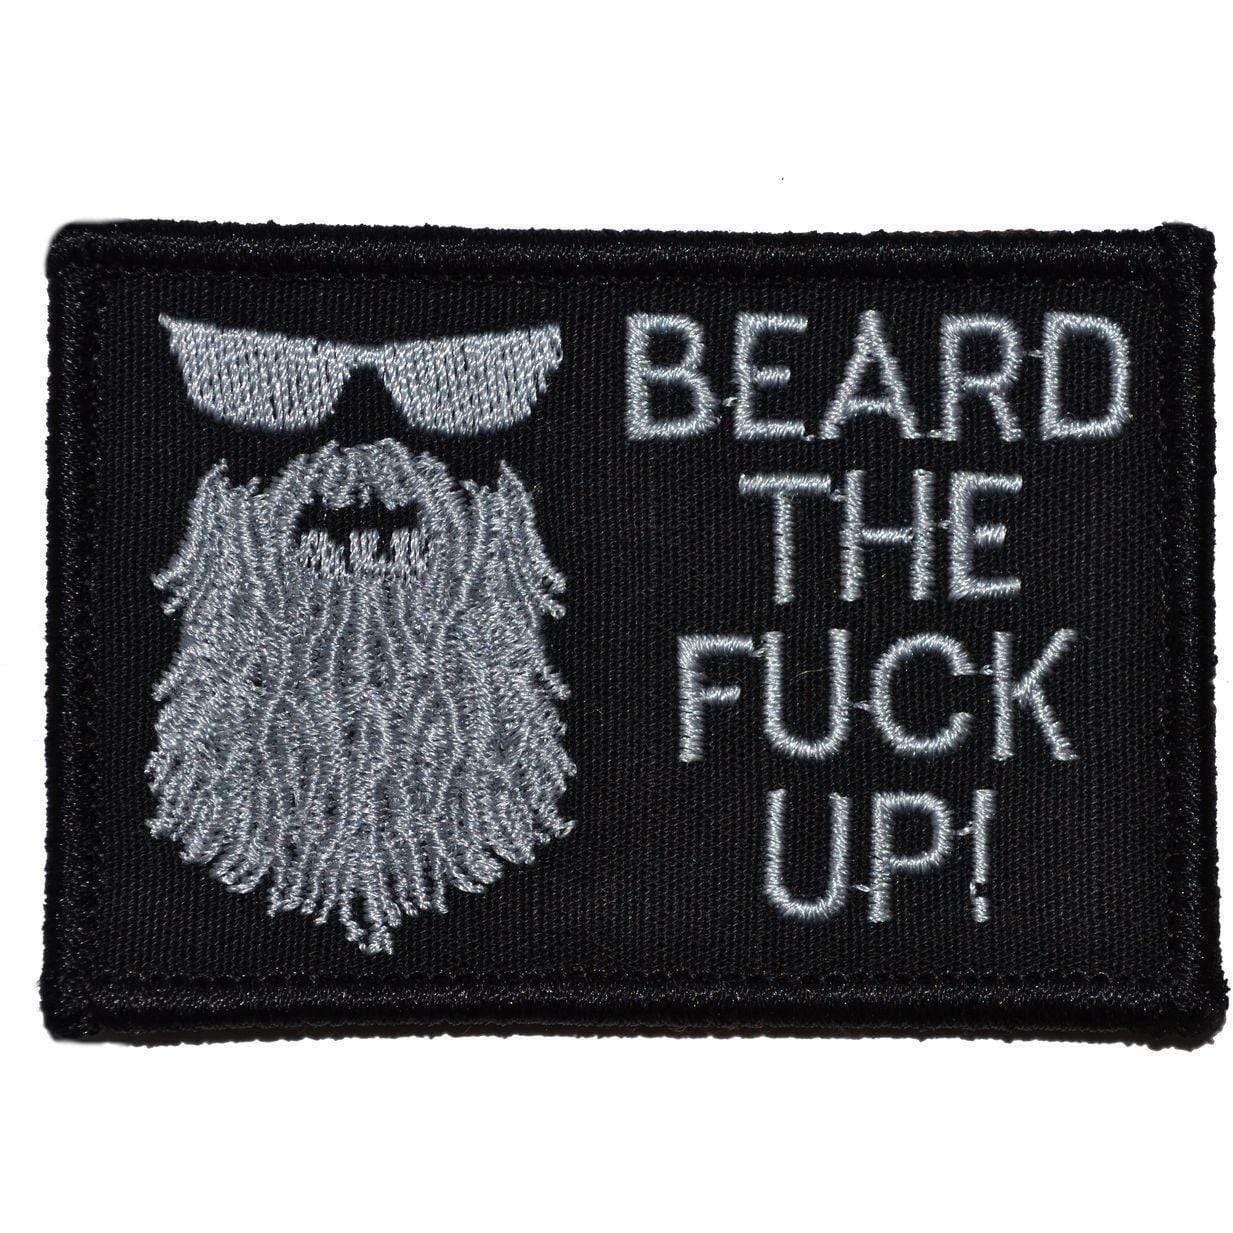 Tactical Gear Junkie Patches Black Beard the Fuck Up - 2x3 Patch